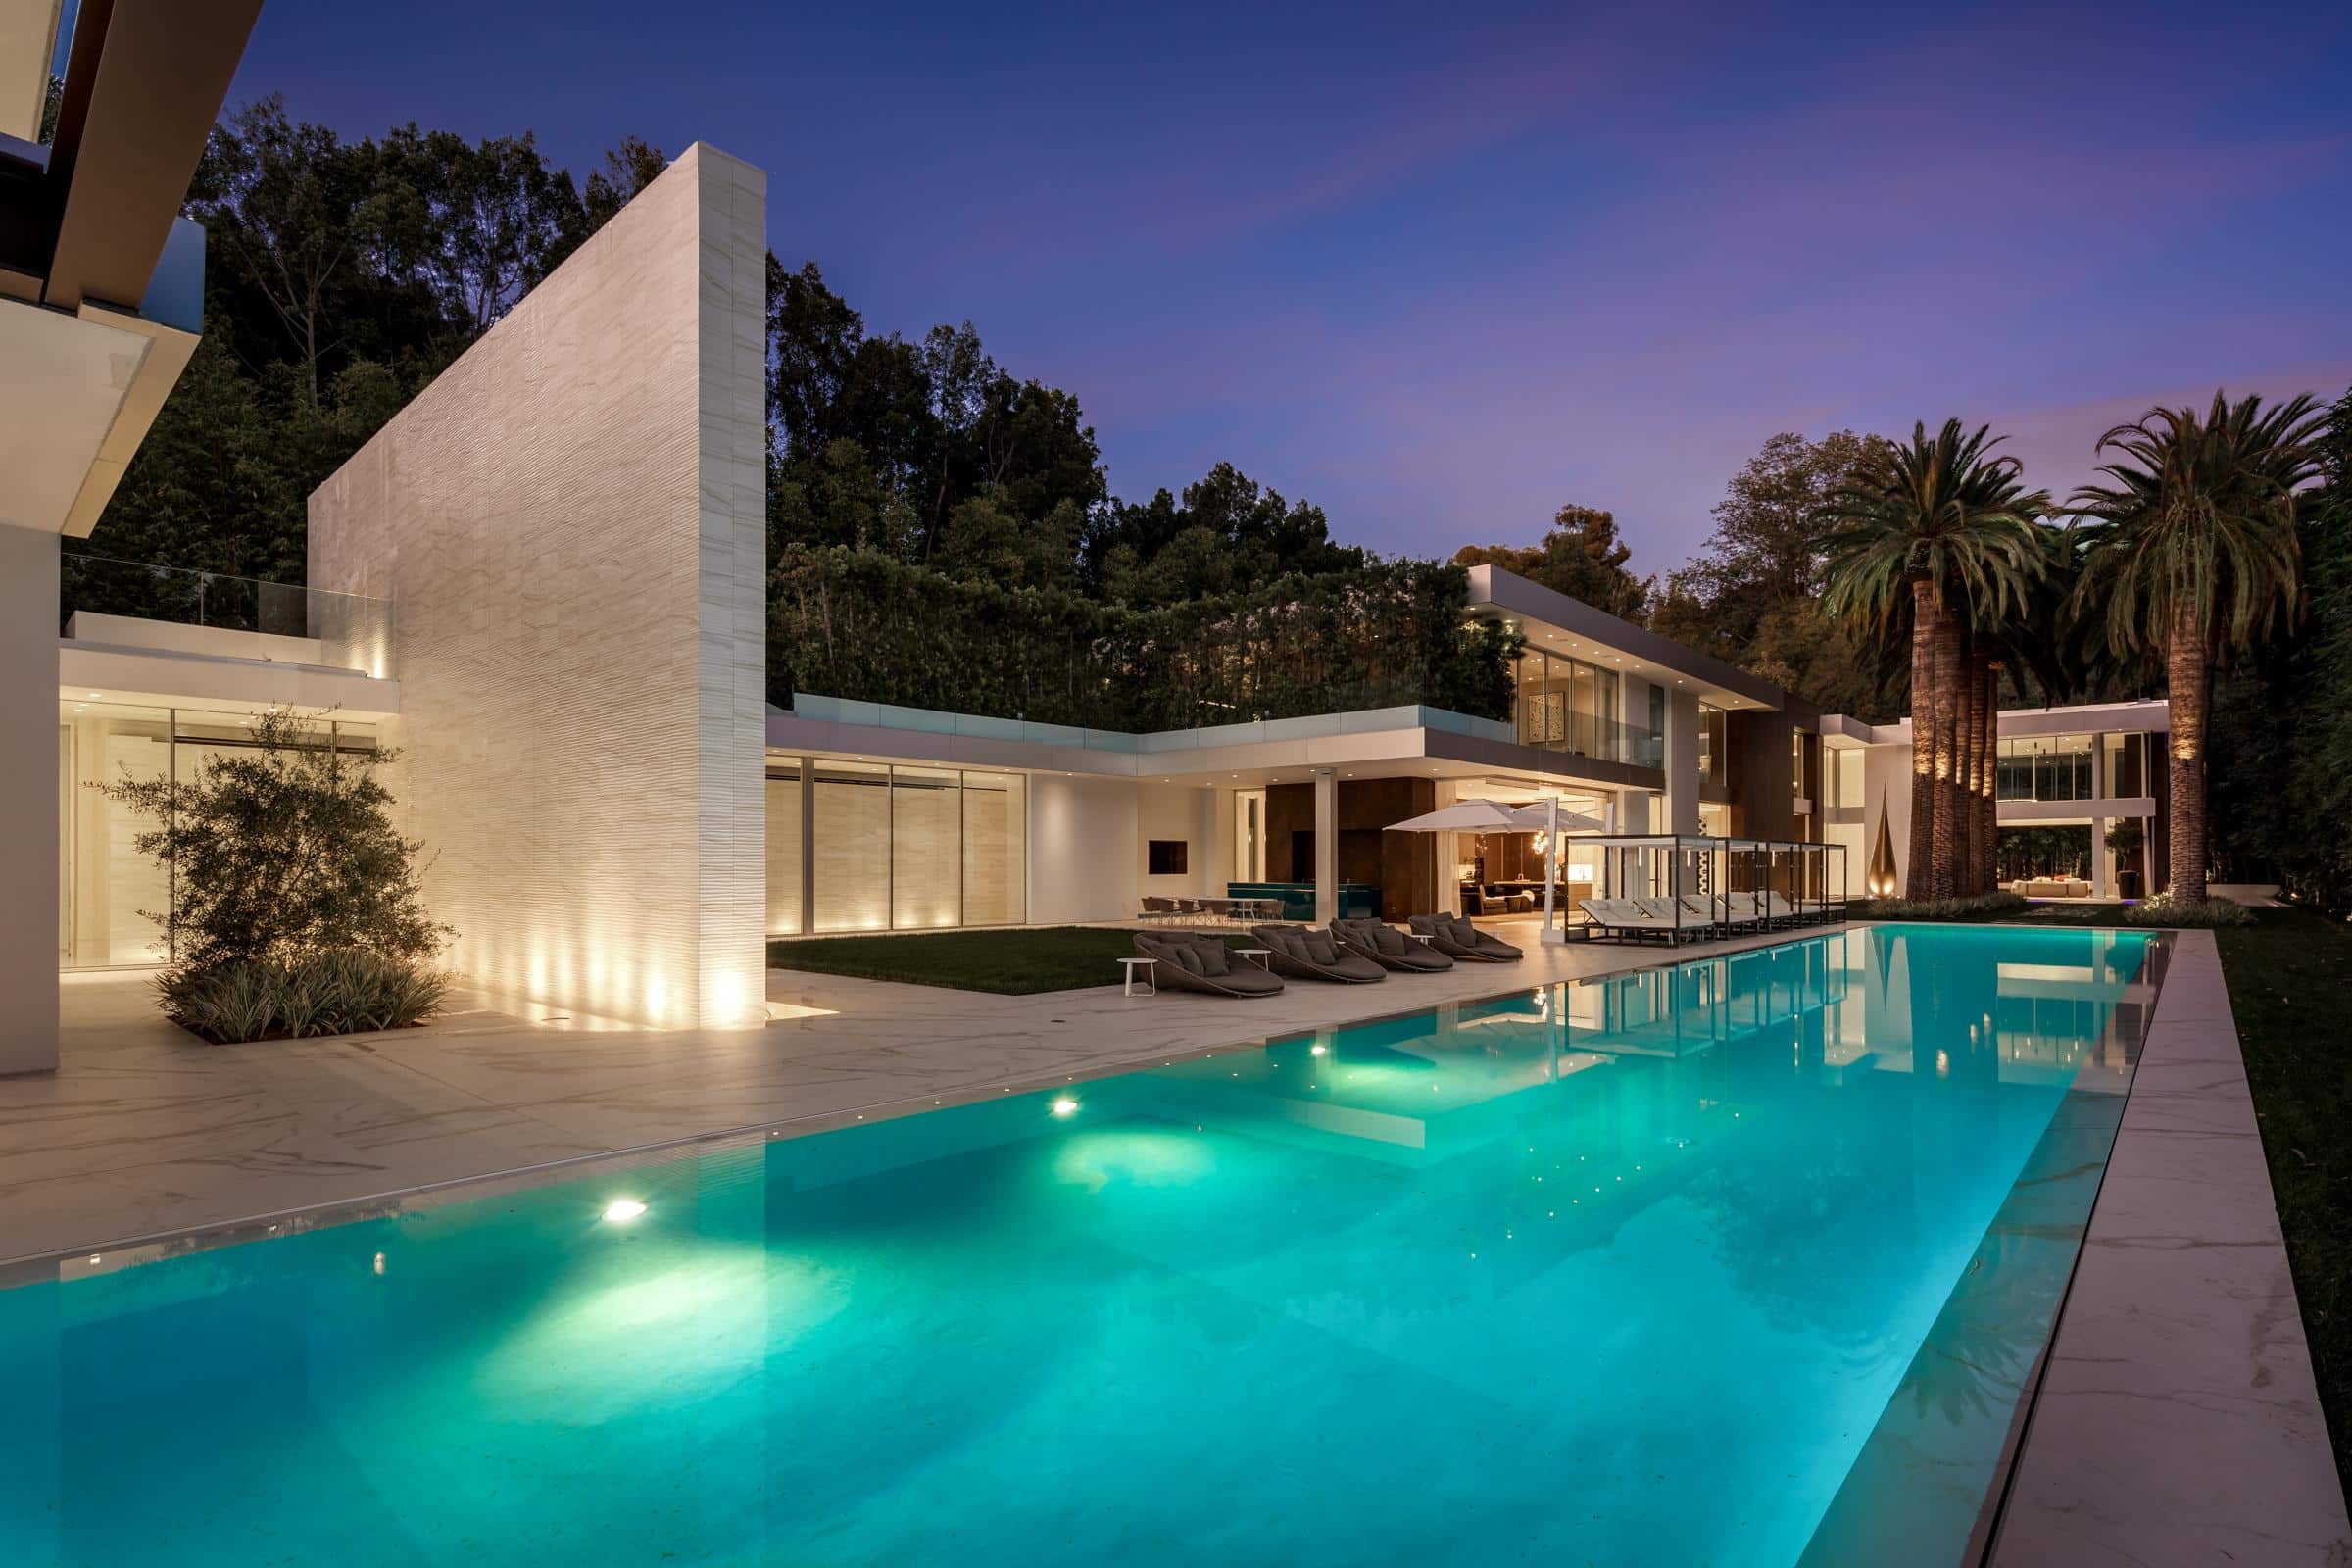 Listing of the Week: Nile Niami’s Bel Air Dream House